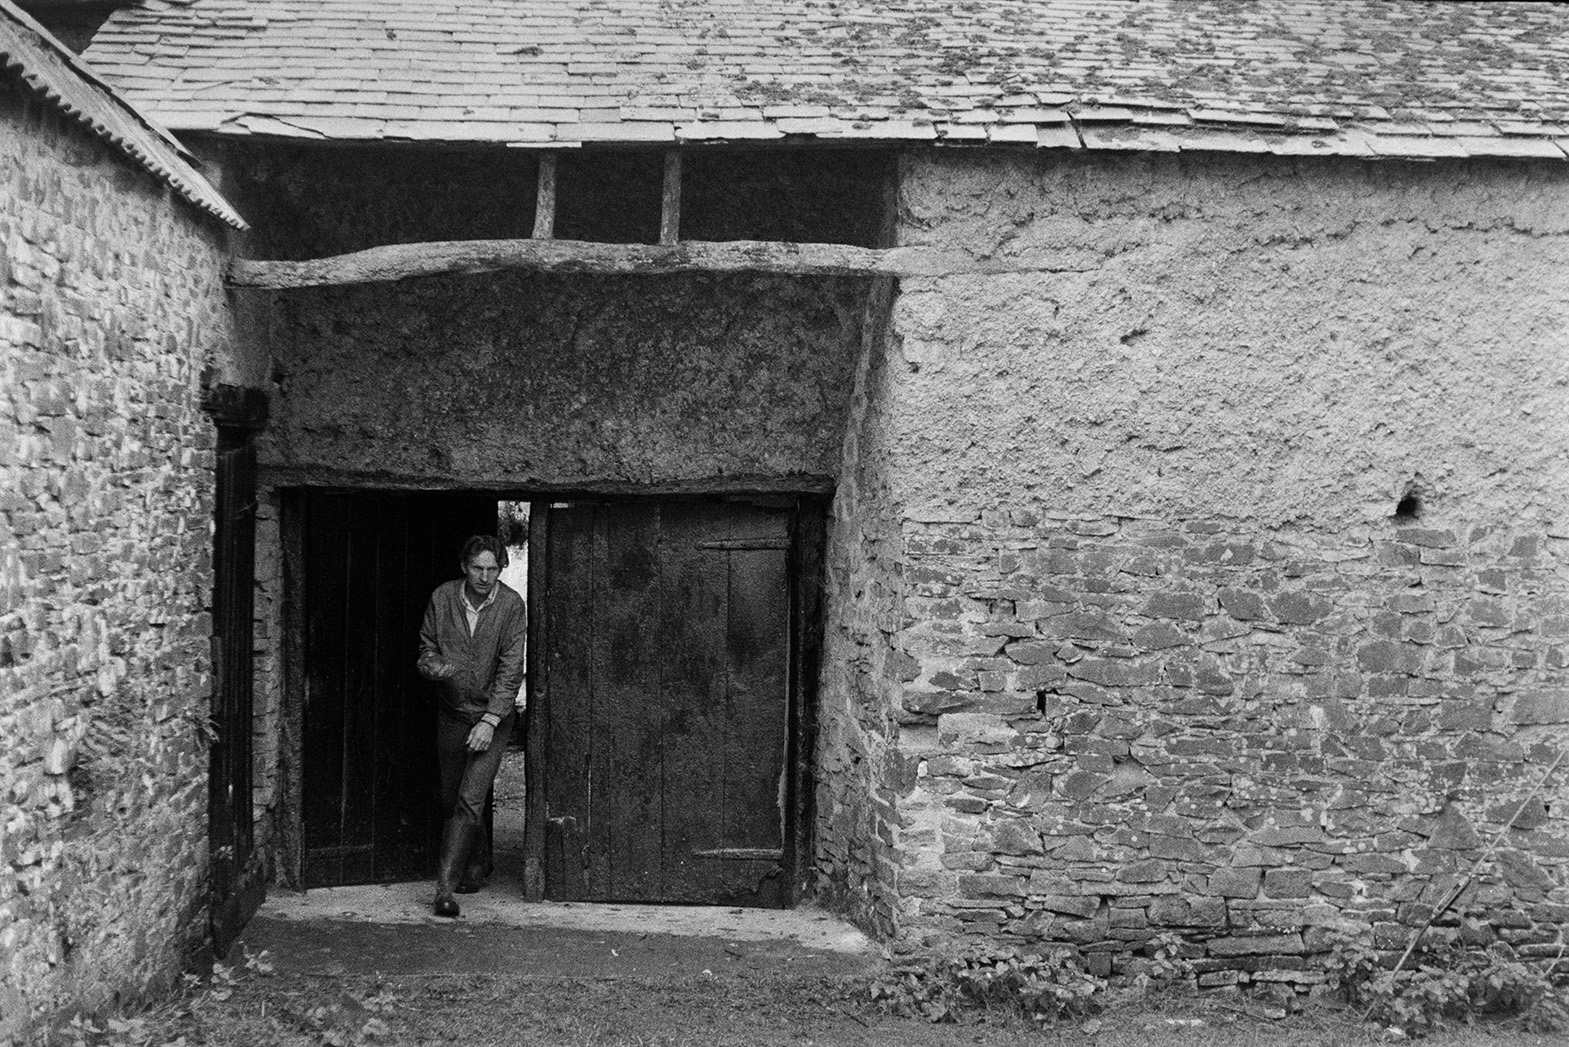 Ivor Bourne walking through wooden gates by a cob and stone barn in Beaford, possibly after his milk round.